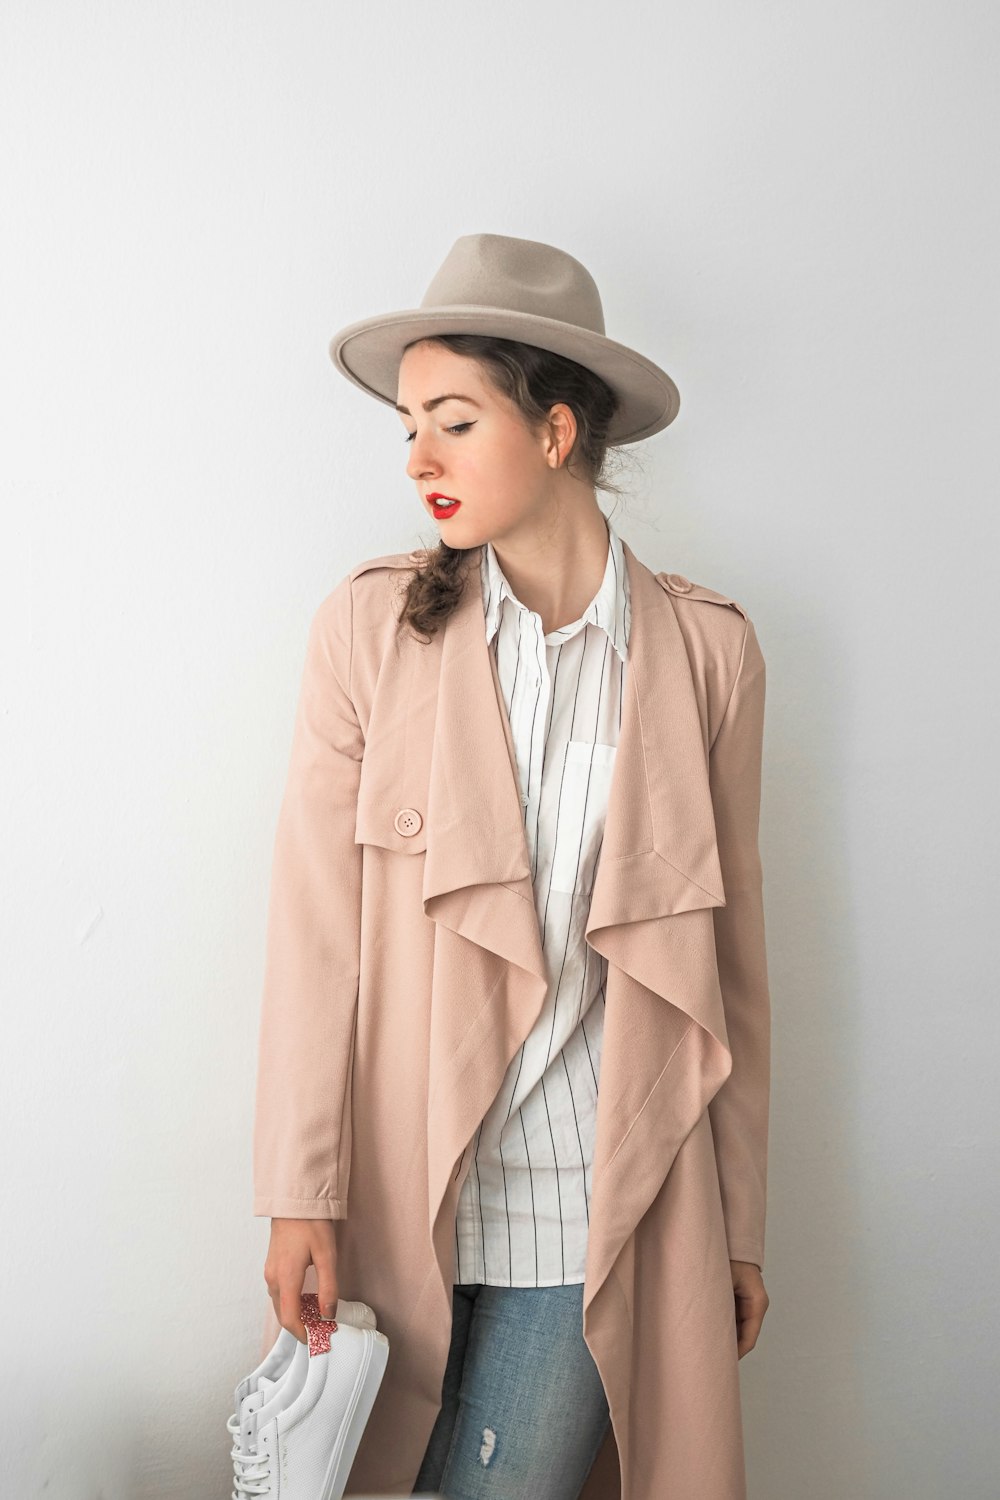 a woman in a hat and trench coat